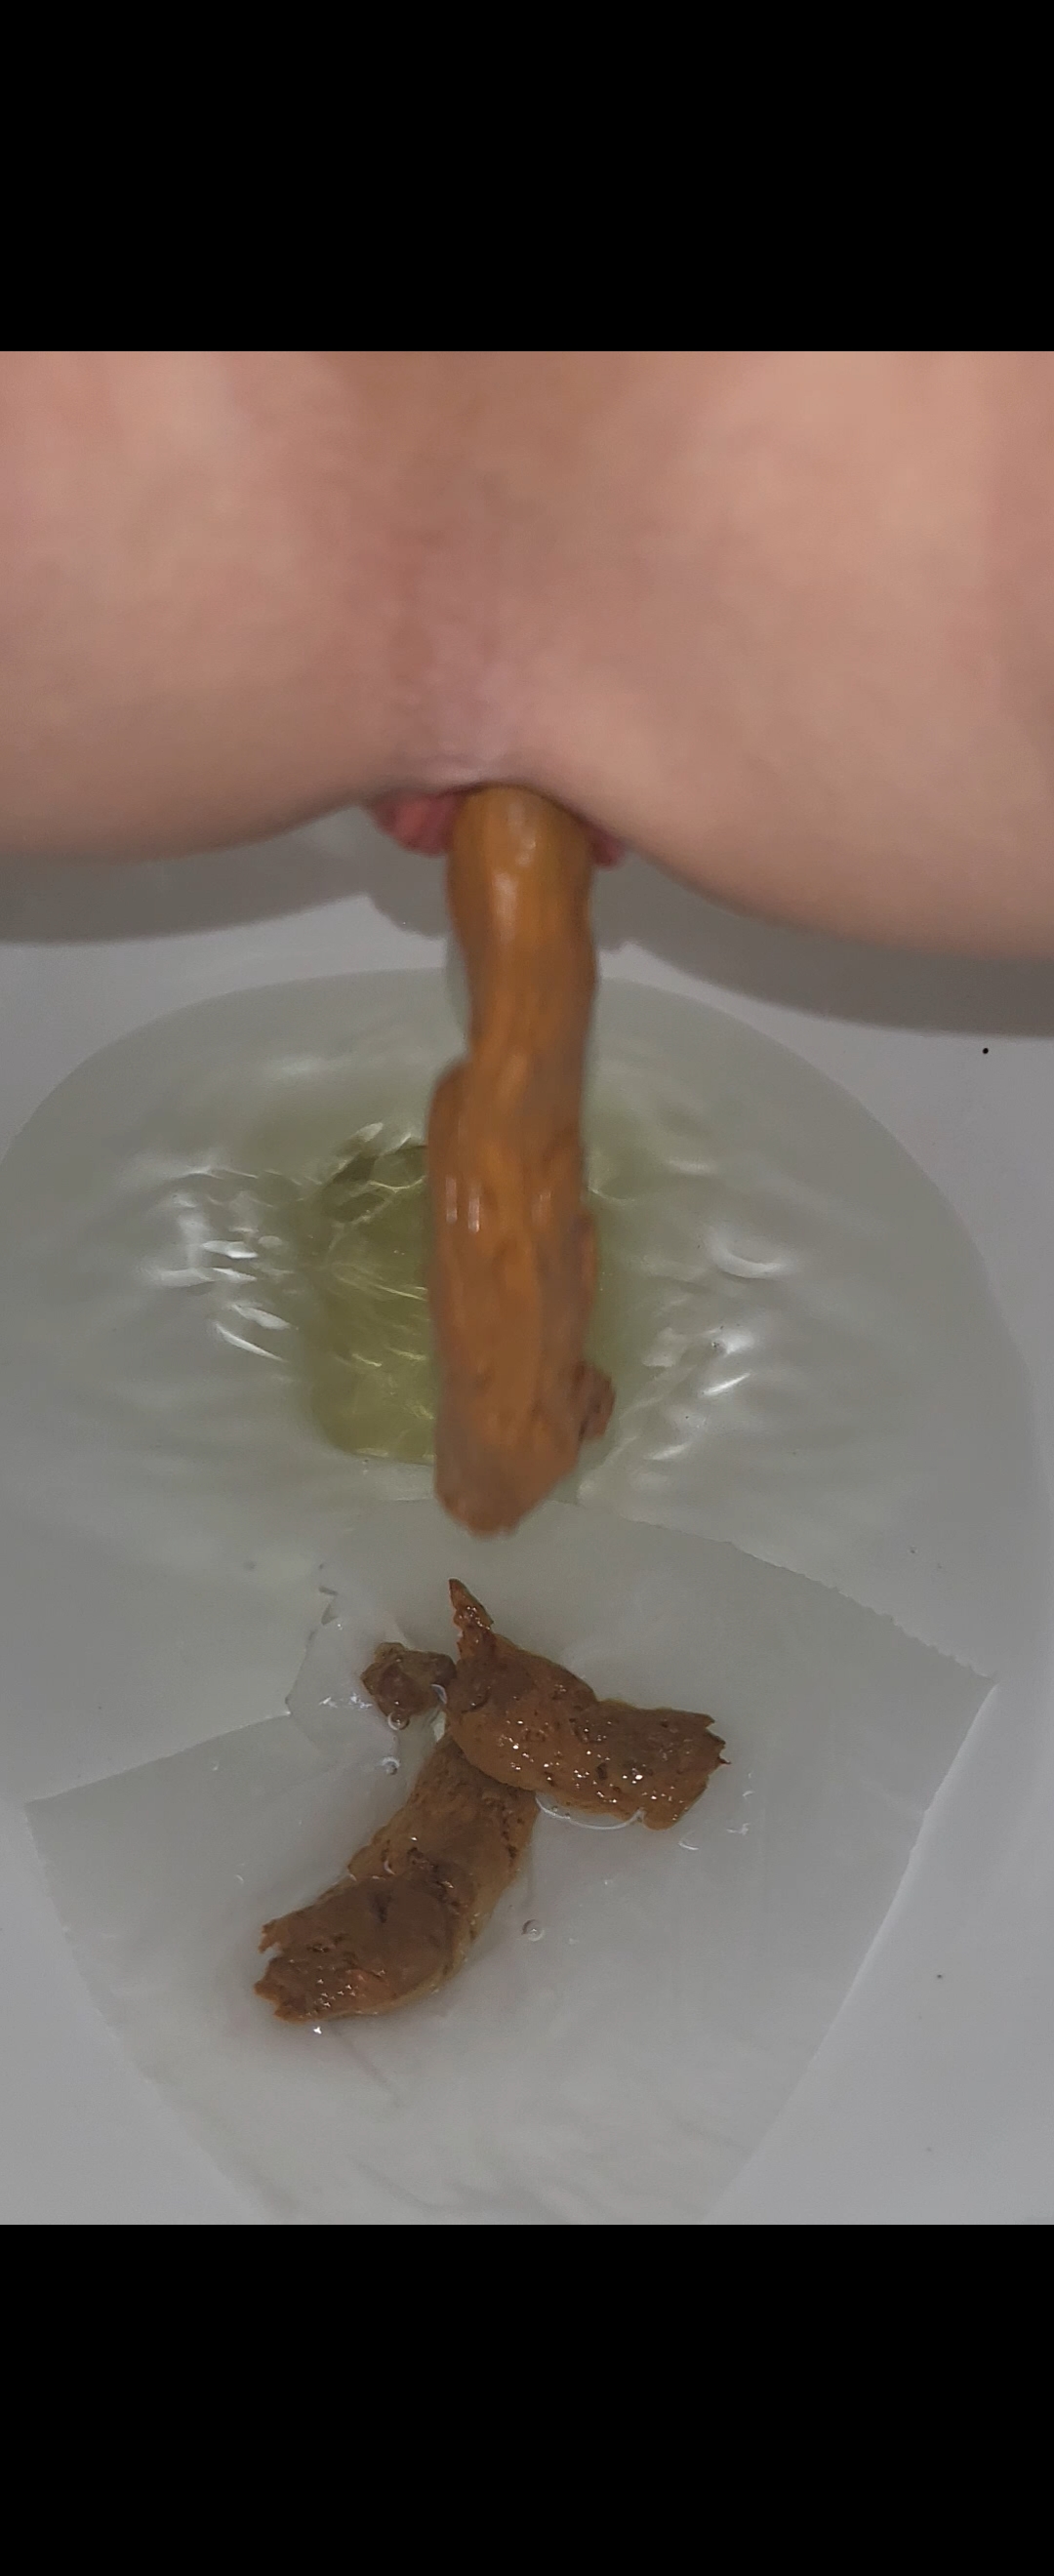 Pooping the toilet